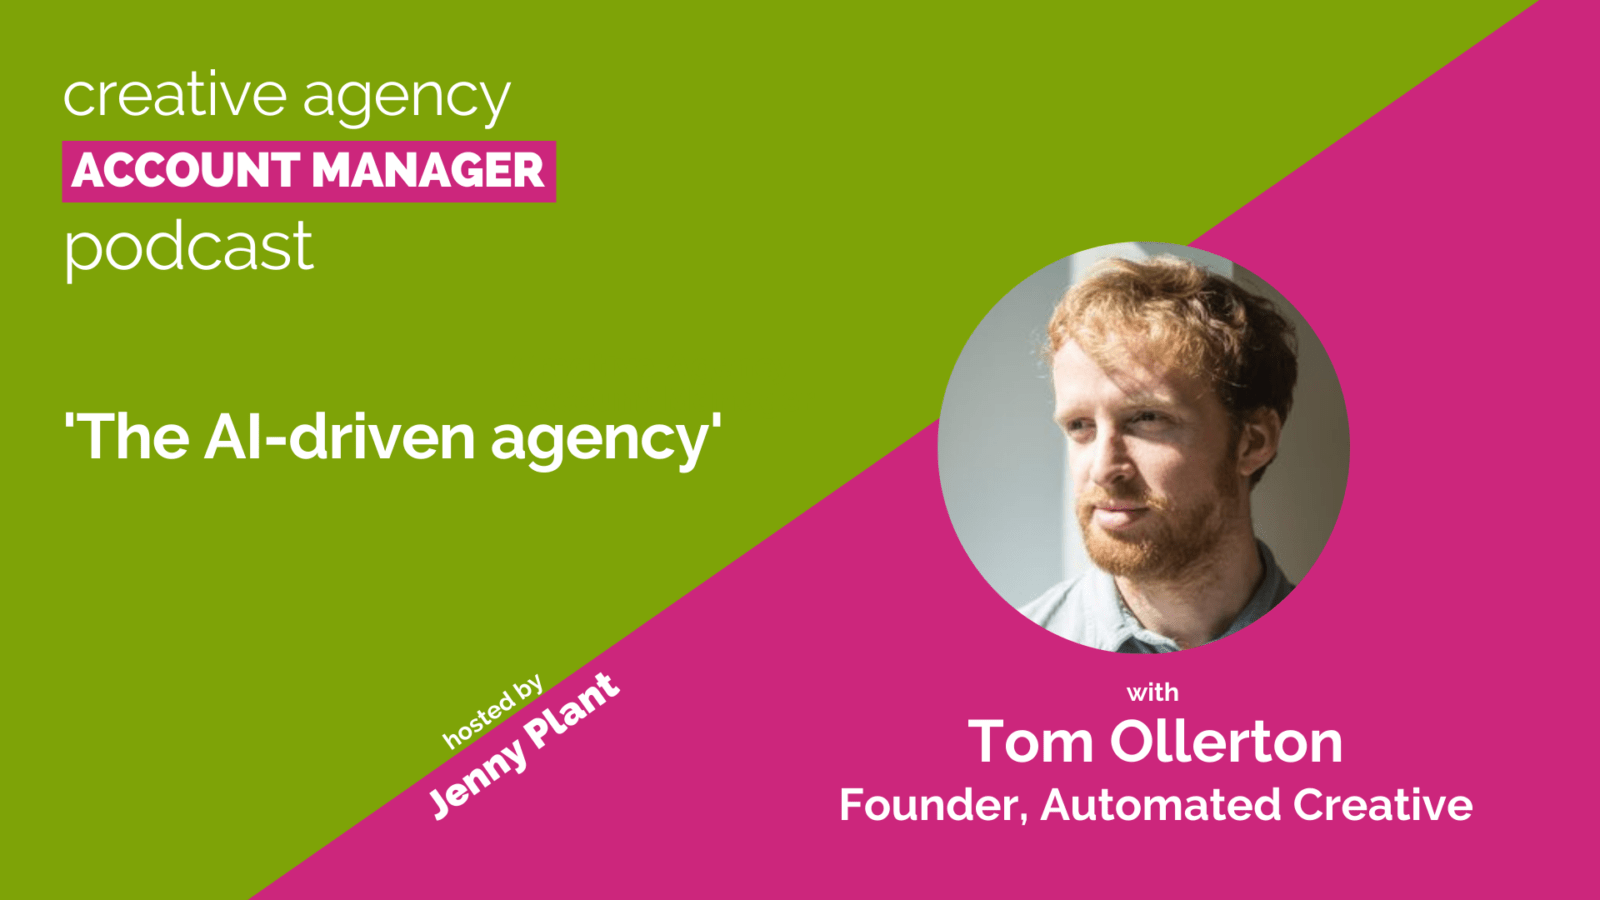 The AI-driven agency, with Tom Ollerton